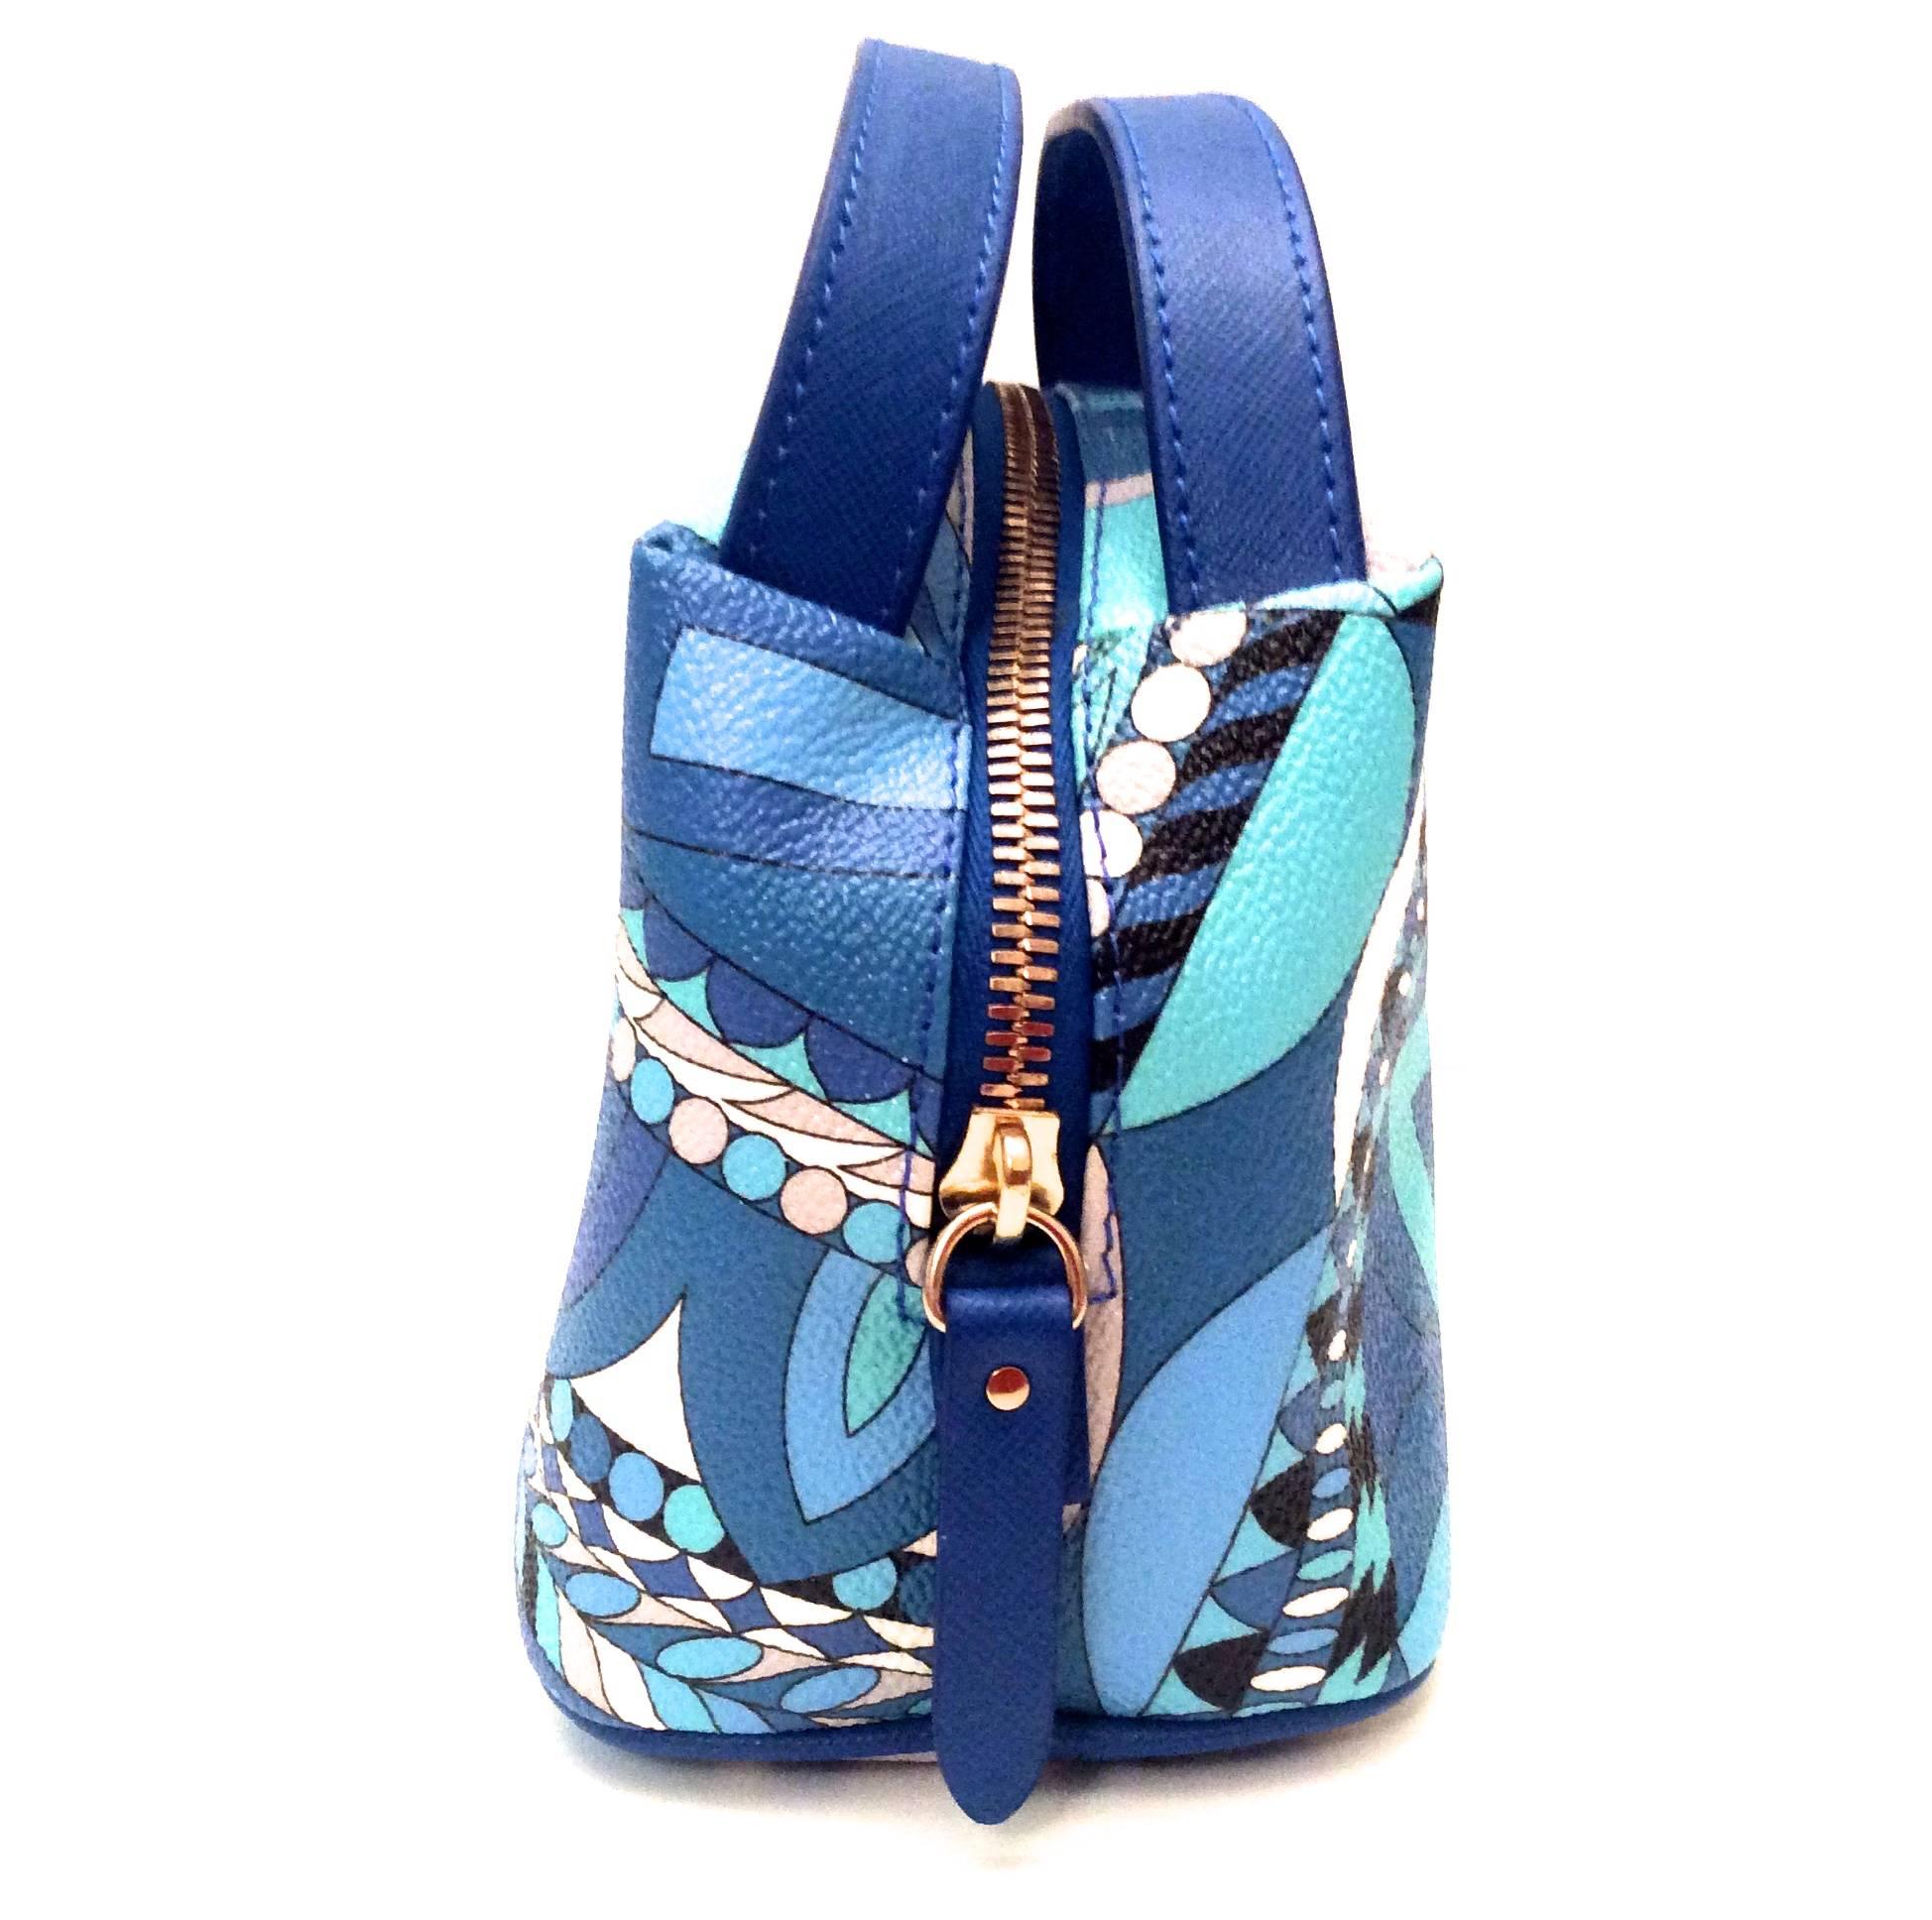 Presented here is a gorgeous mini handbag from Emilio Pucci. The bag is a small little top handle bag that has a zippered top. The pattern is comprised of shades of blue, white, black and gray. The zipper is gold tone with blue leather. The top